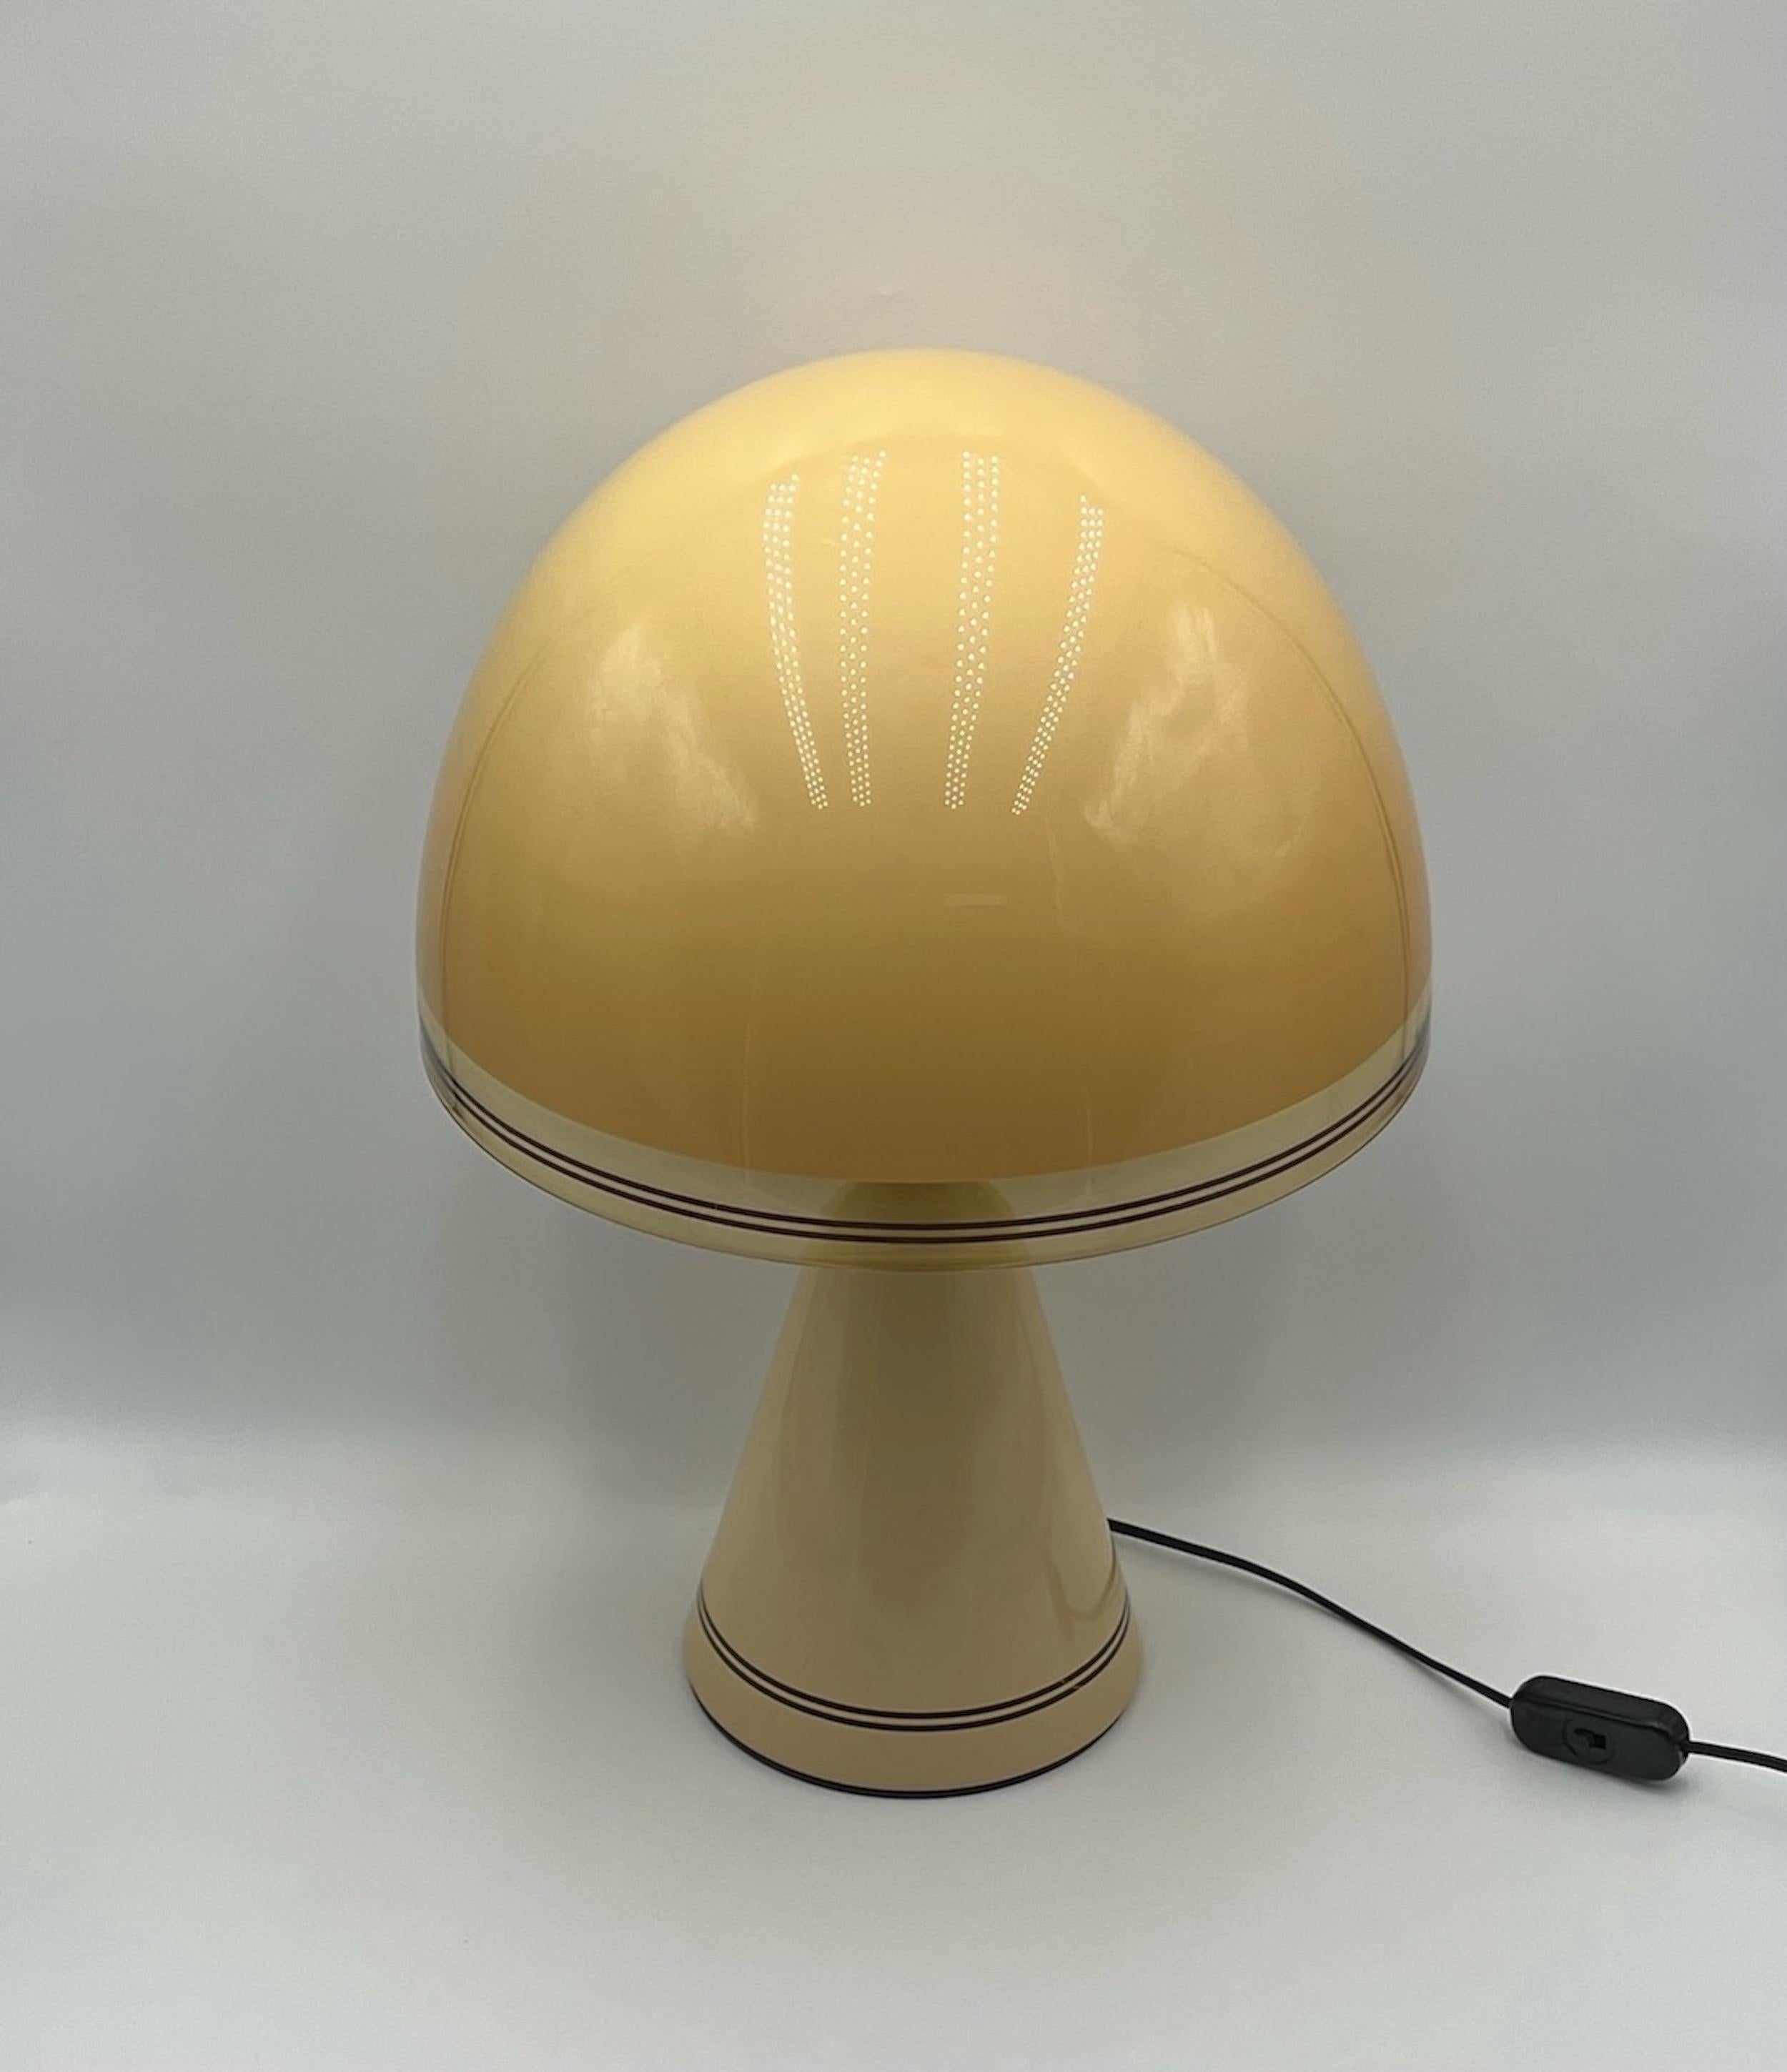 Space age iconic Table Lamp 'Baobab' by iGuzzini - a project conceived by iGuzzini design team in 1976 and produced by the world-famous italian maker from 1978 until 1992.  

Baobab is made with a truncated ochre conical base in turned metal (iron),